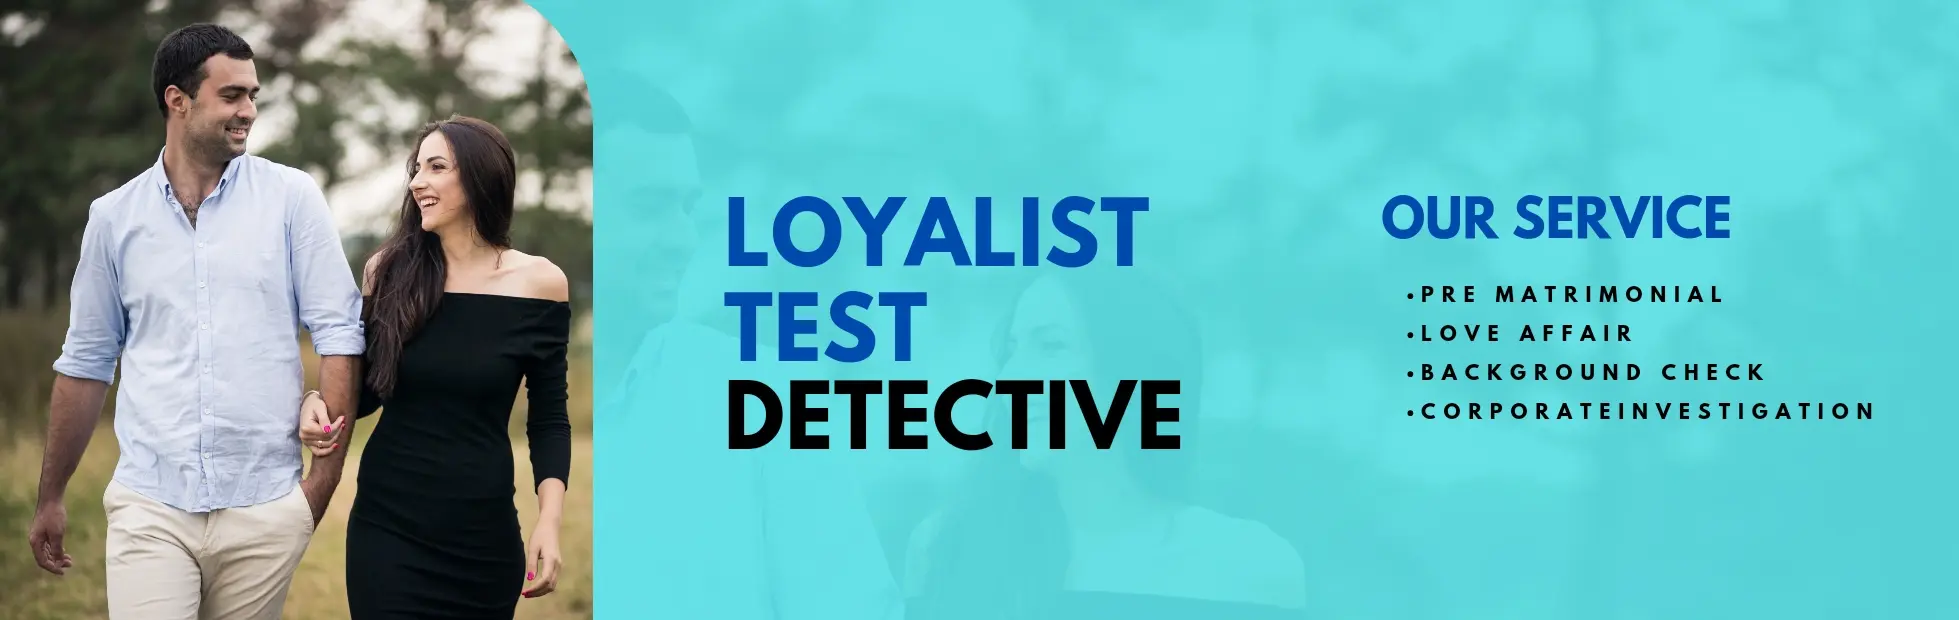 Loyalty Test Detective 